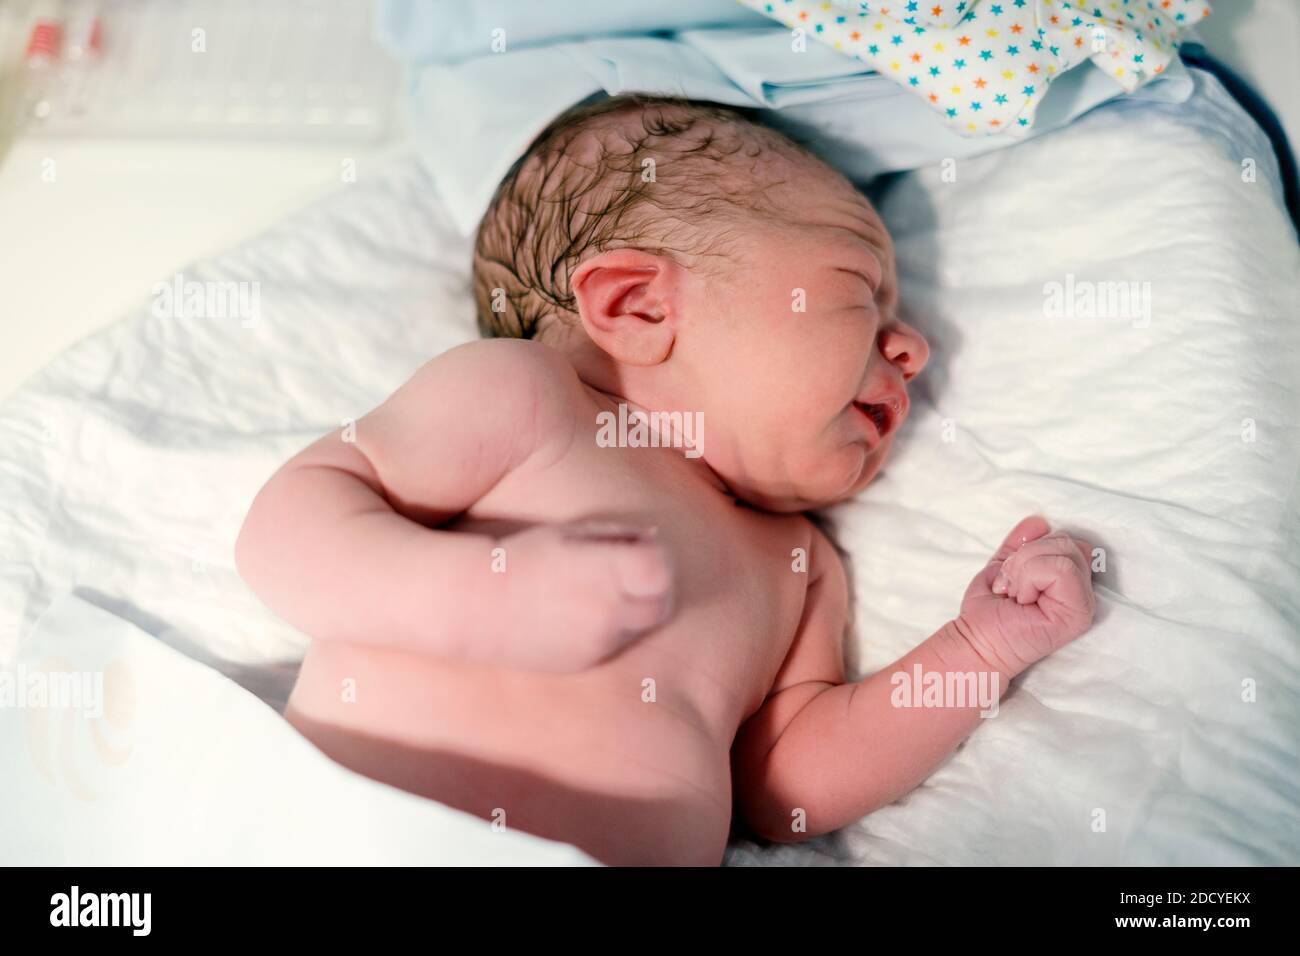 Newborn baby boy waiting for being dressed after birth Stock Photo